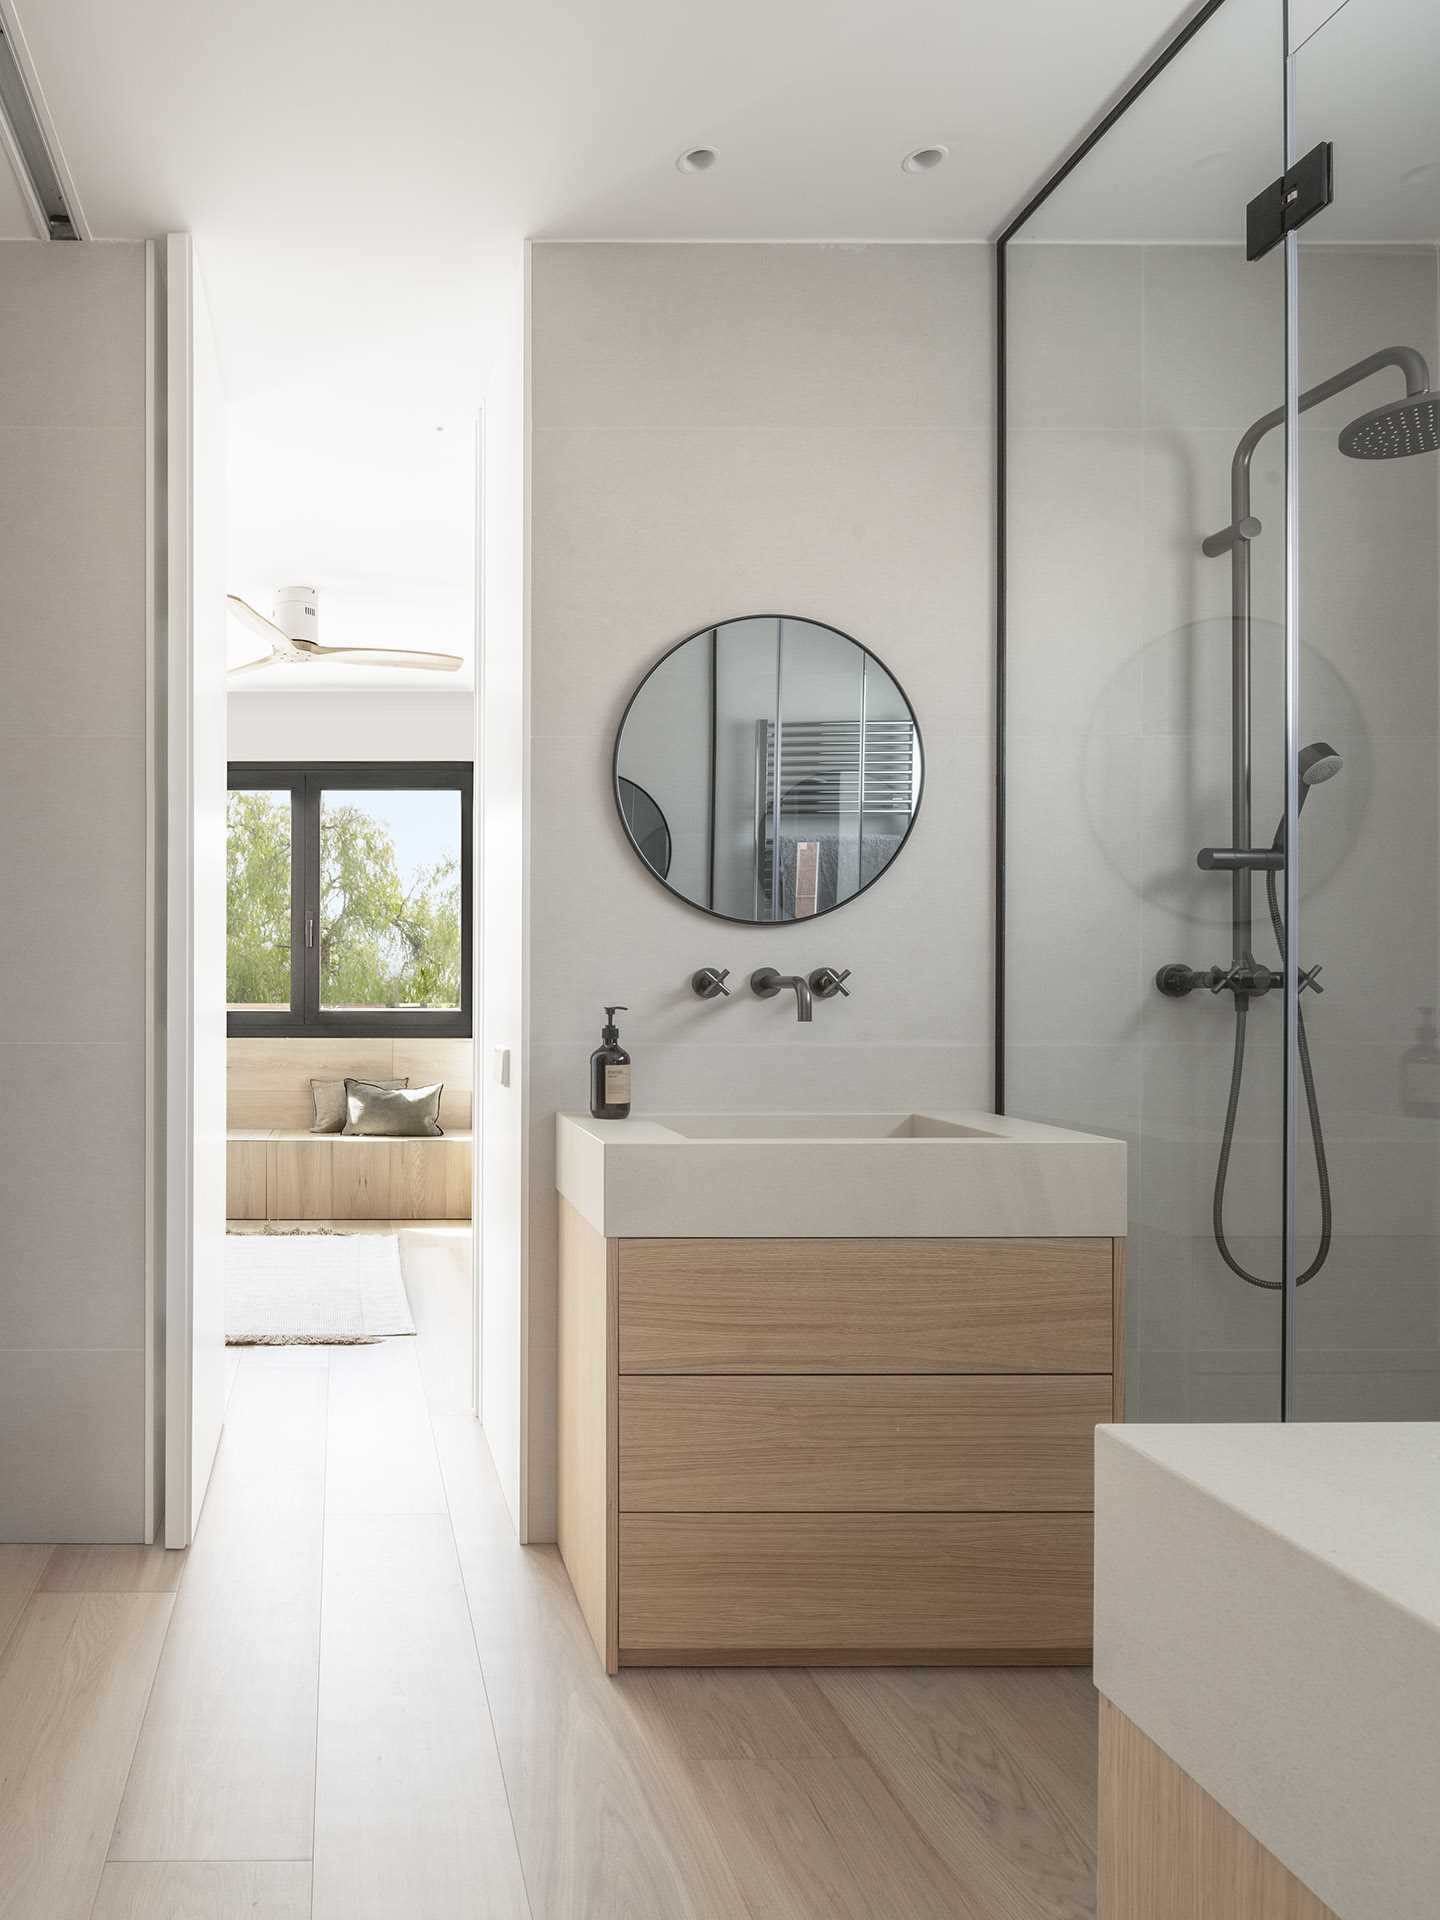 A modern jack-and-jill bathroom with separate vanities and a walk-in shower.